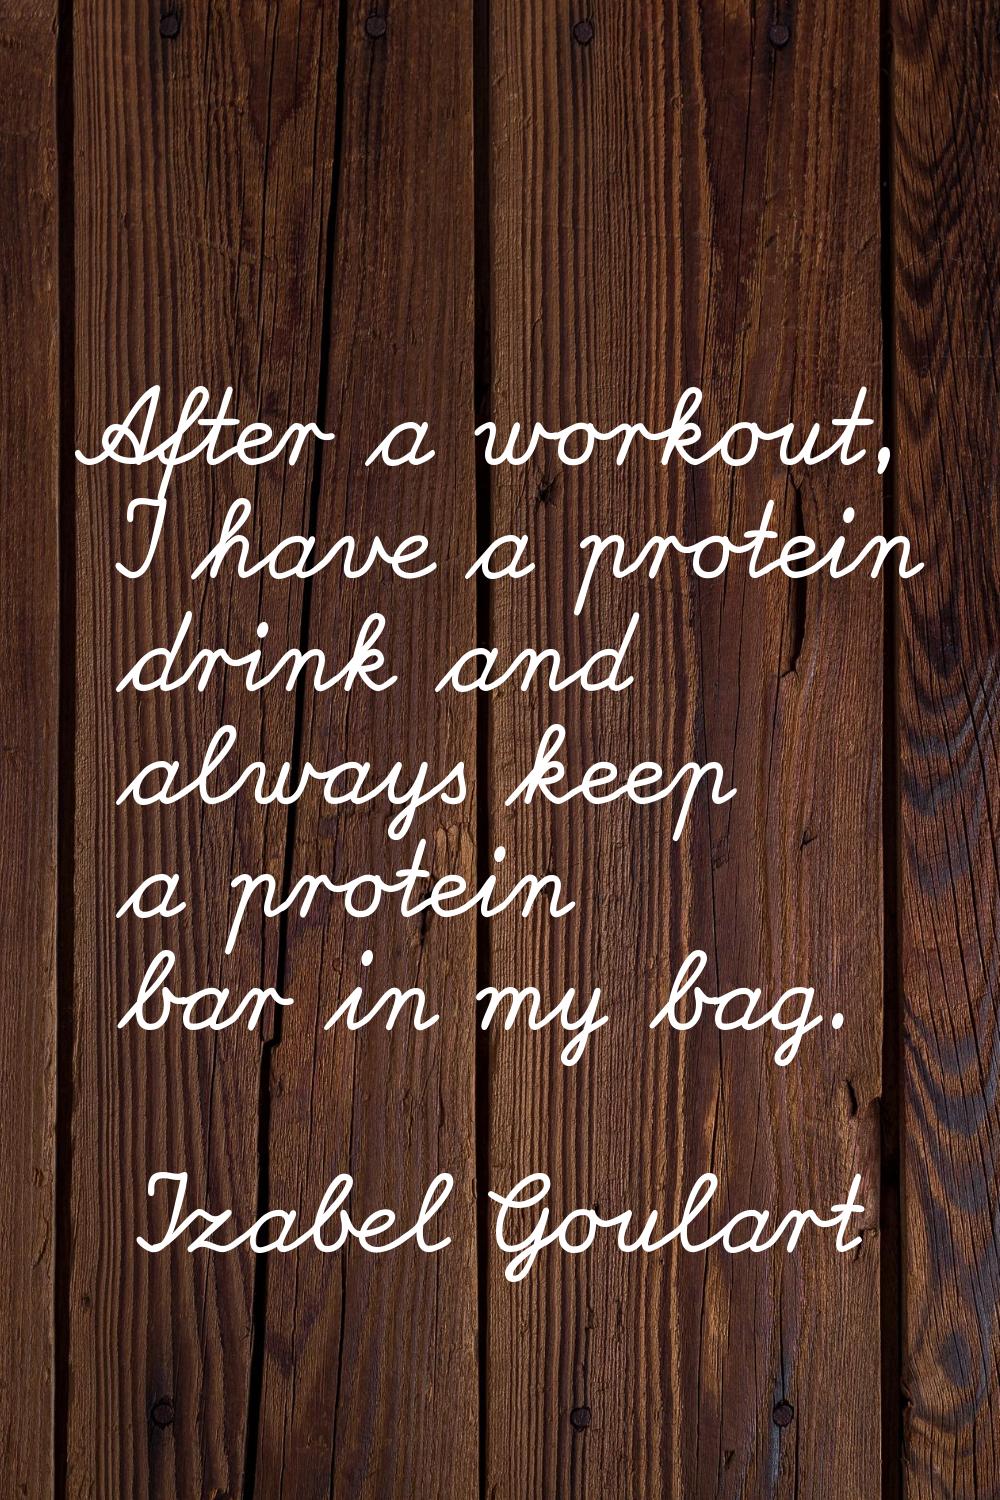 After a workout, I have a protein drink and always keep a protein bar in my bag.